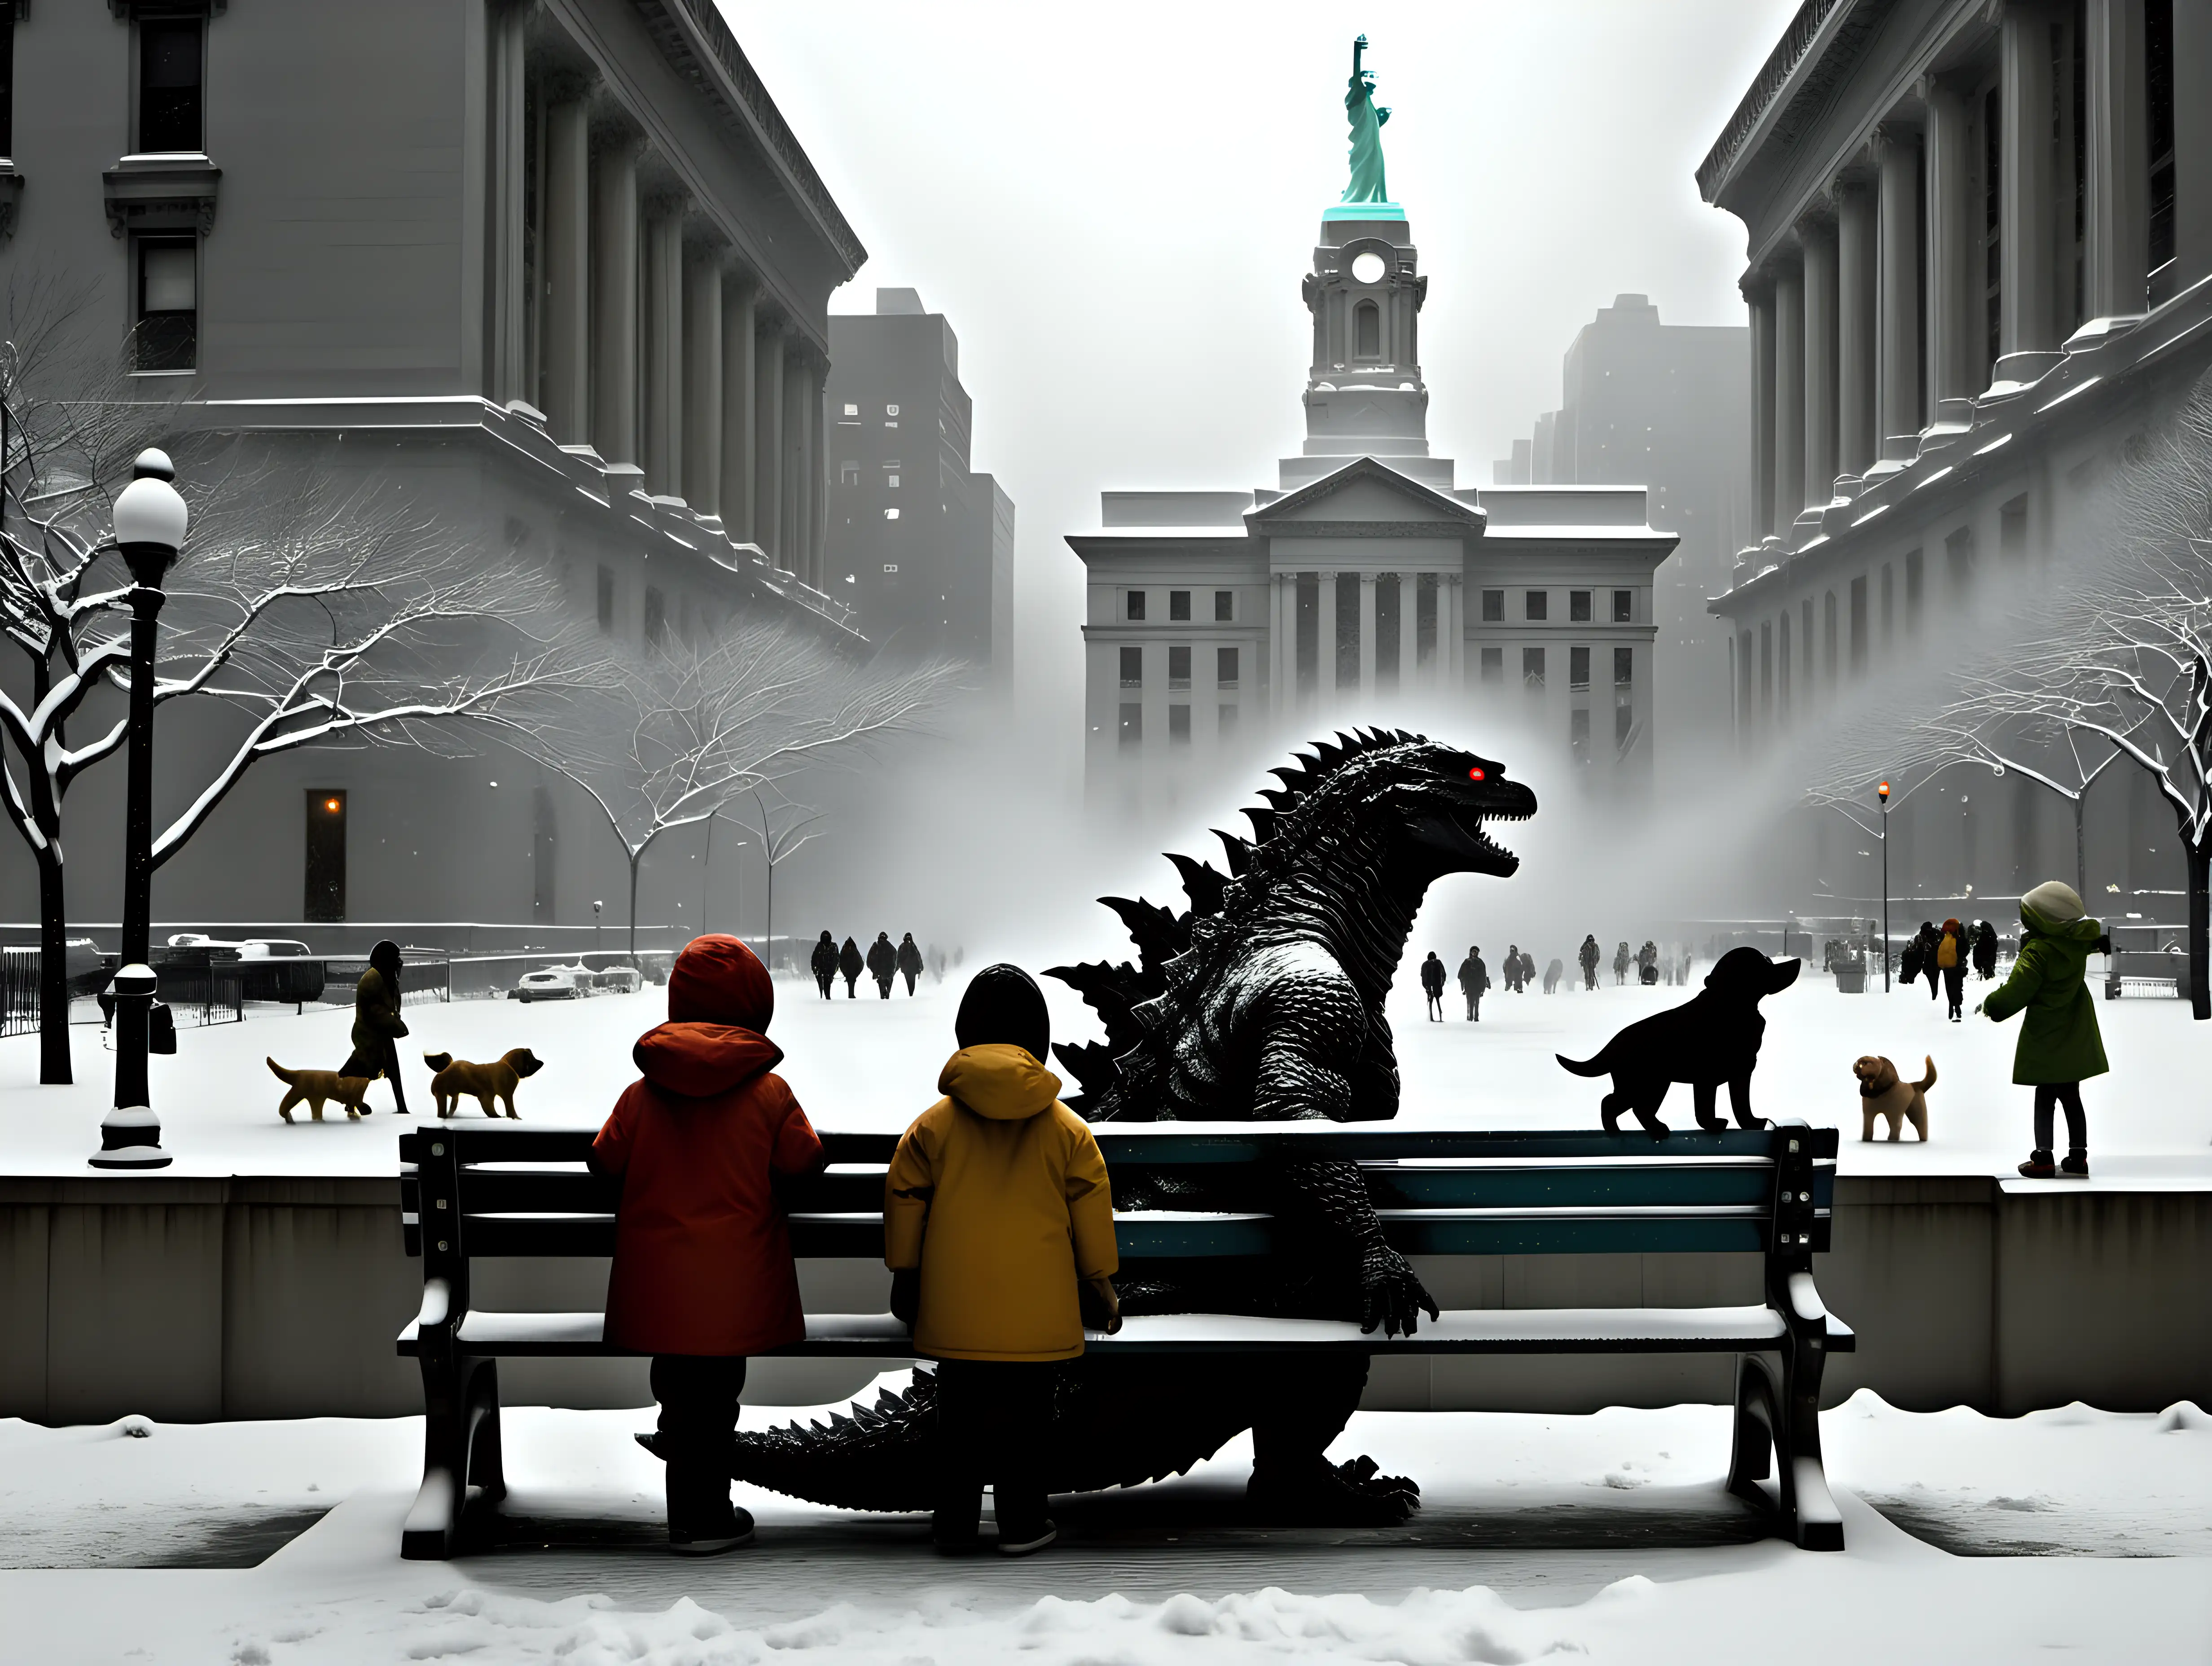 Godzilla behind children on a park bench with a puppy in a snow storm in front of the NYC library Edward Hopper style